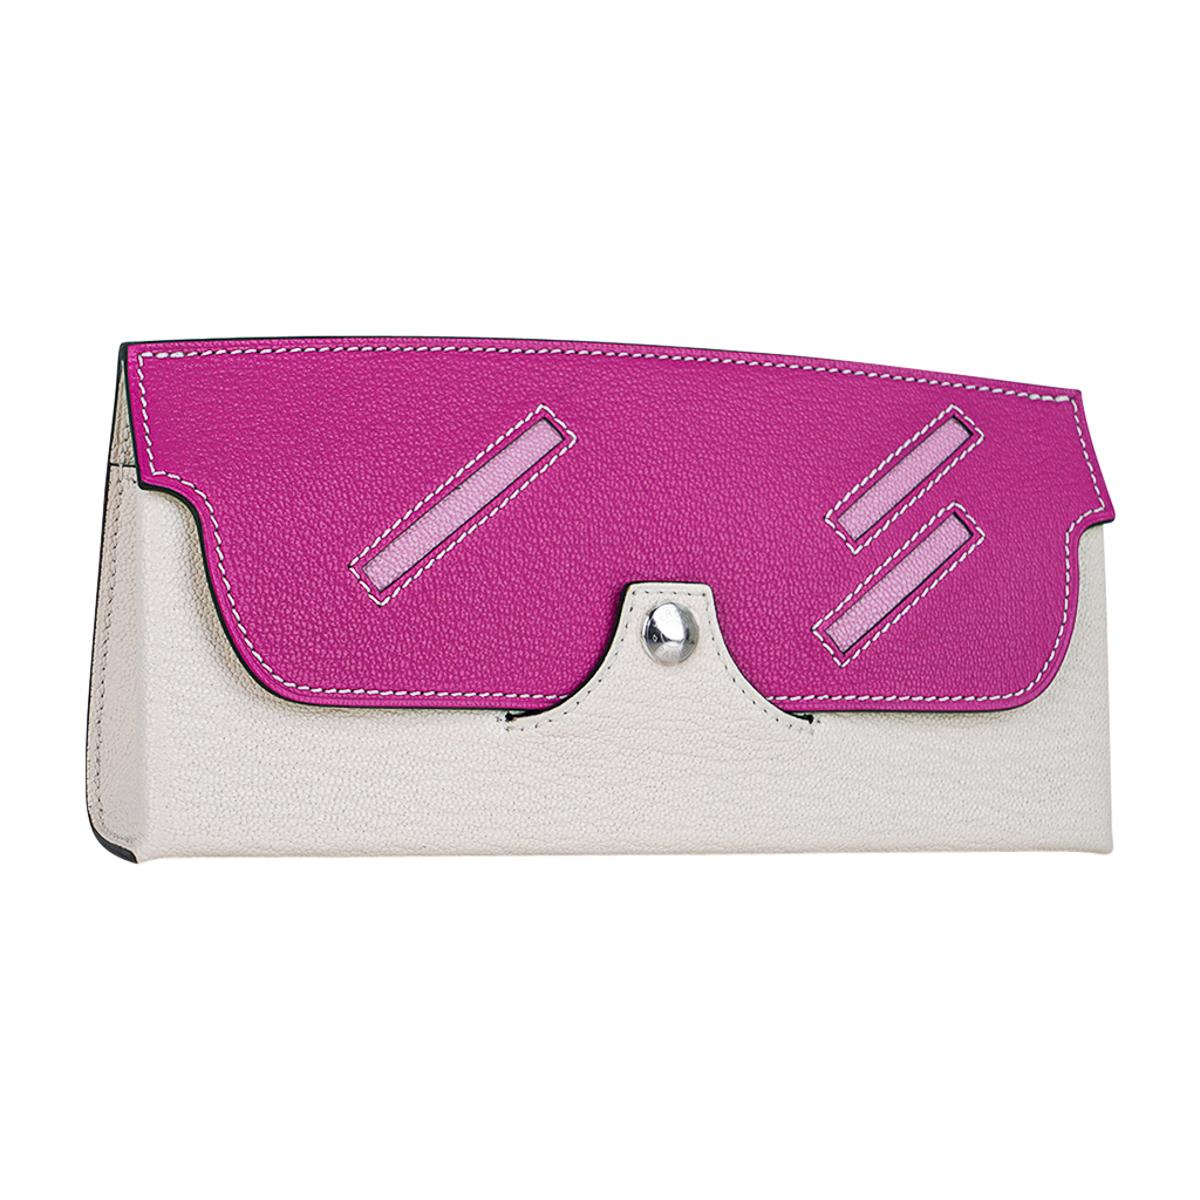 Mightychic offers a rare Hermes In The Loop Wink Glasses Case is whimsical and delightful.
Featured in Nata, Magnolia and Mauve Sylvestre.
Open the case for more fun.
The Wink is Citron with a leather Hermes Sellier plaque in Cuivre.
Mysore Chevre